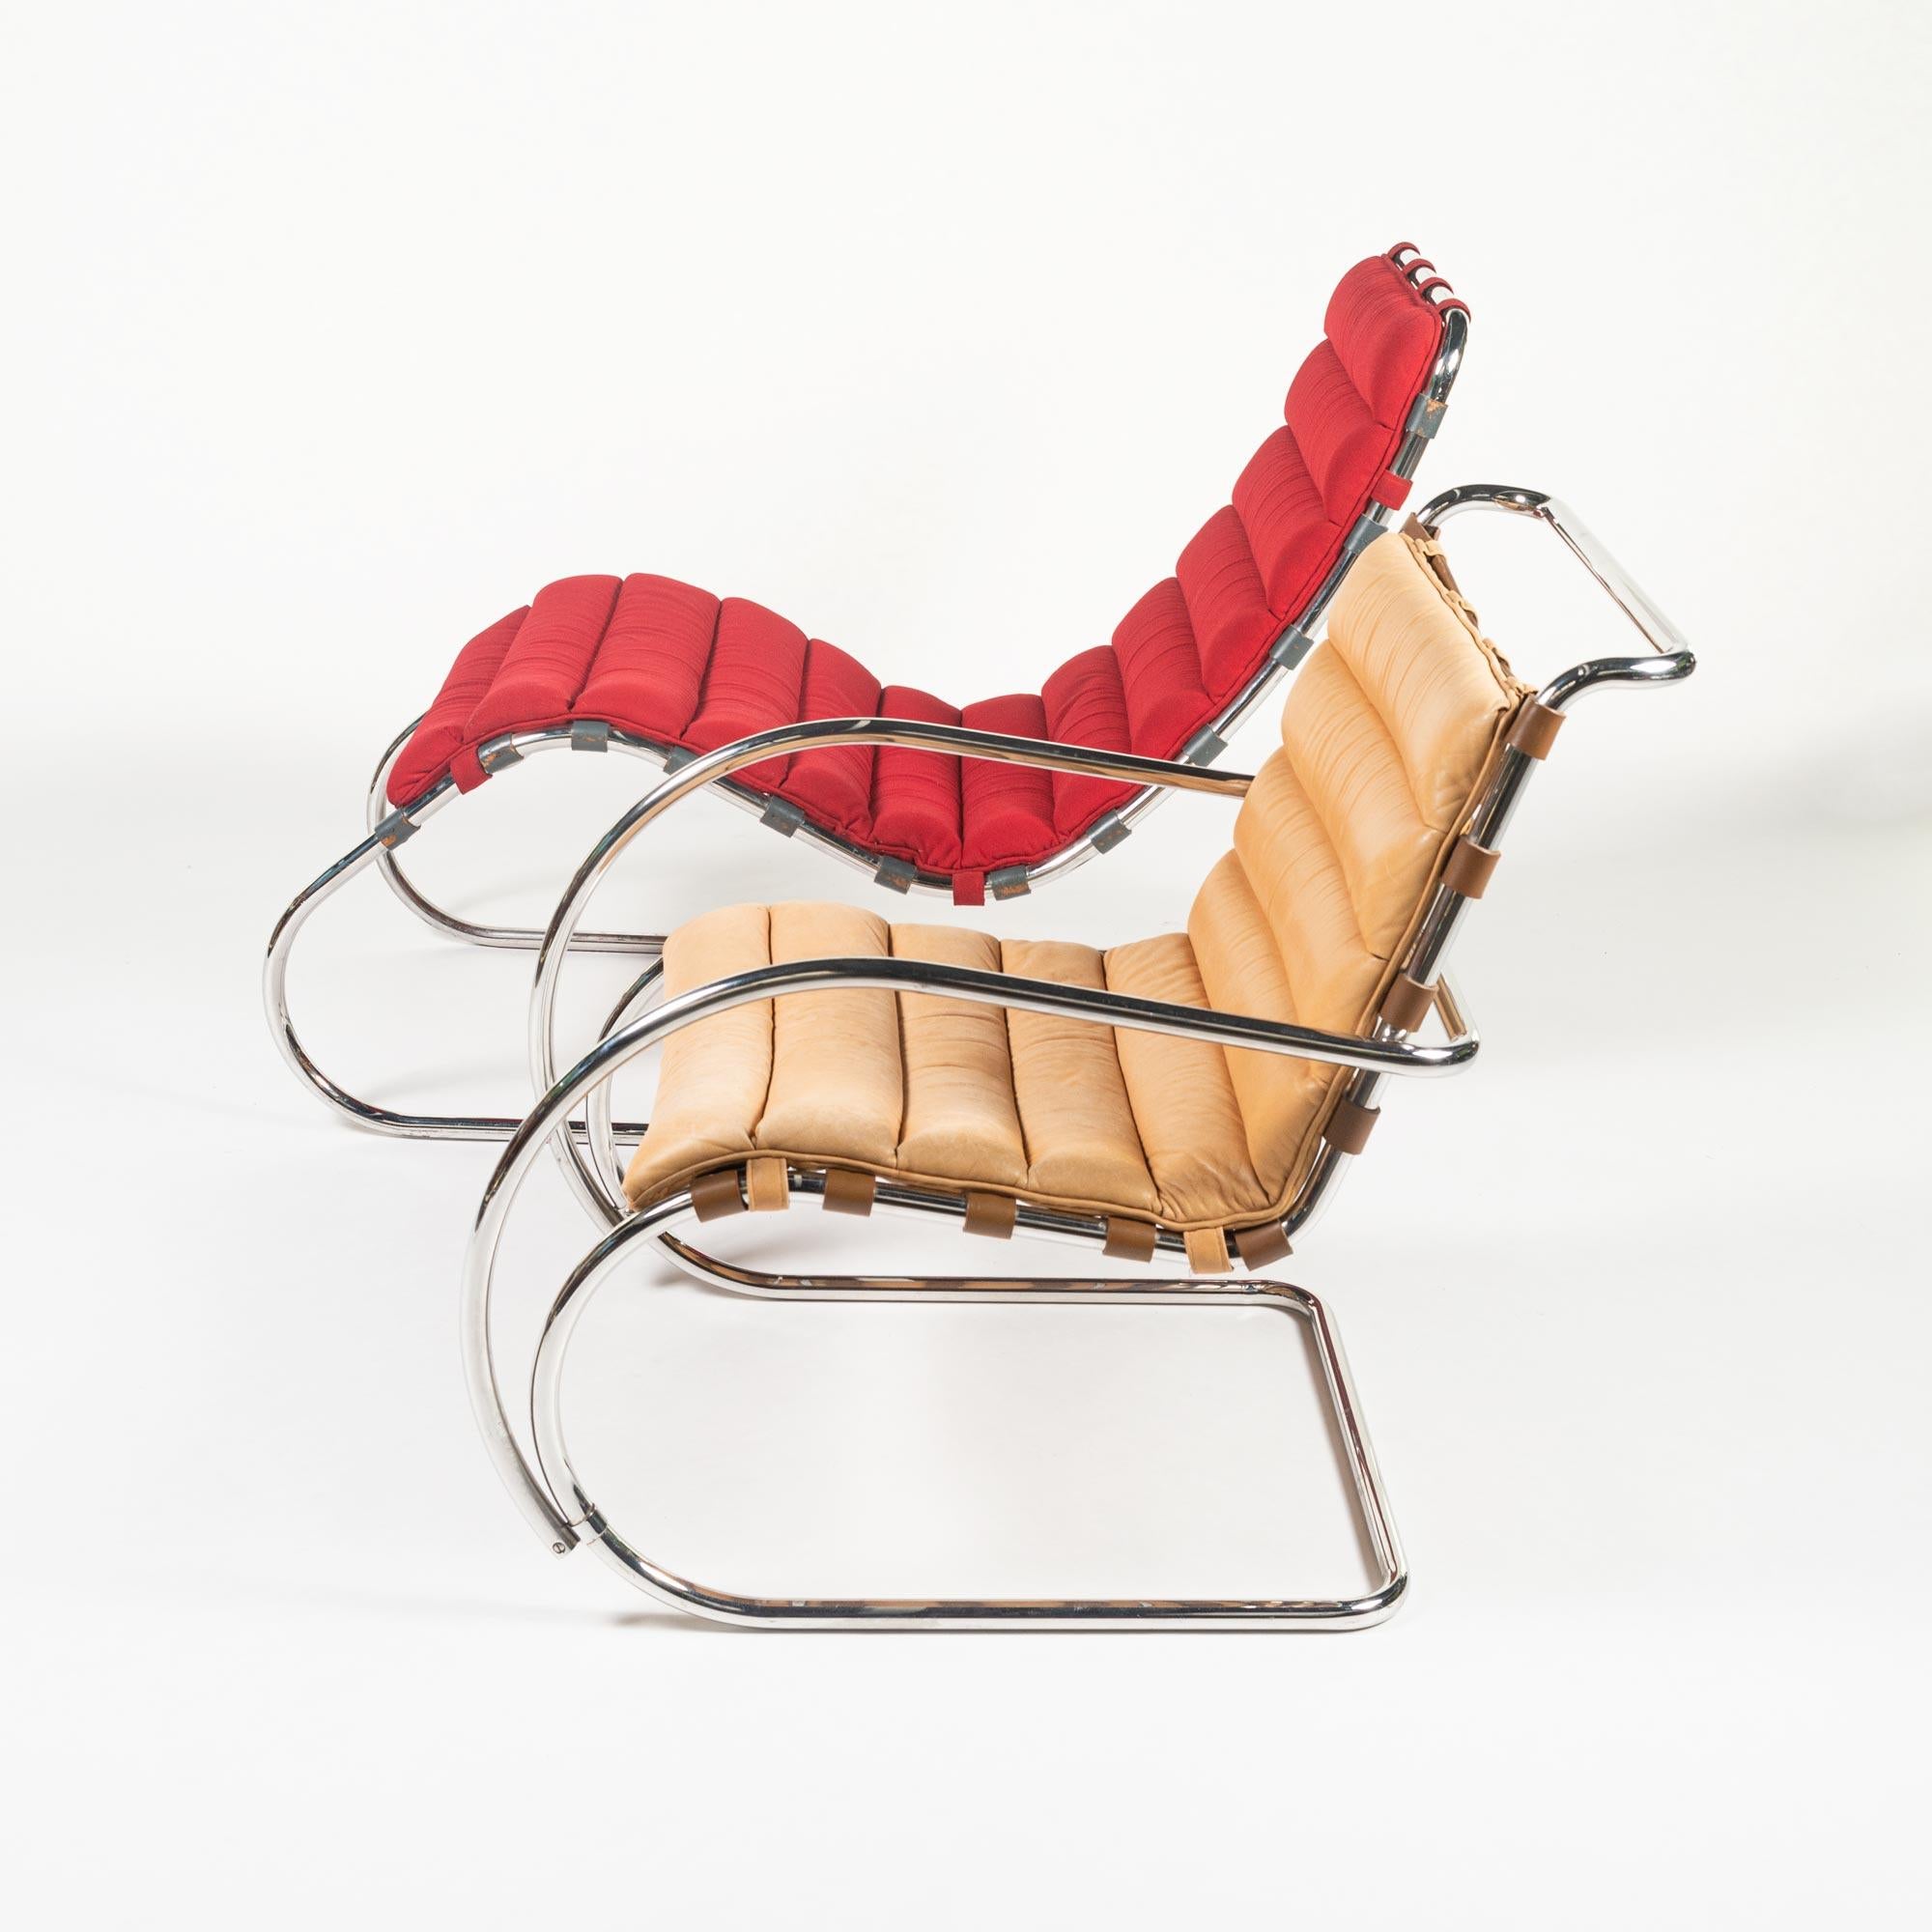 MR Chaise Lounge Chair by Mies van der Rohe for Knoll 1